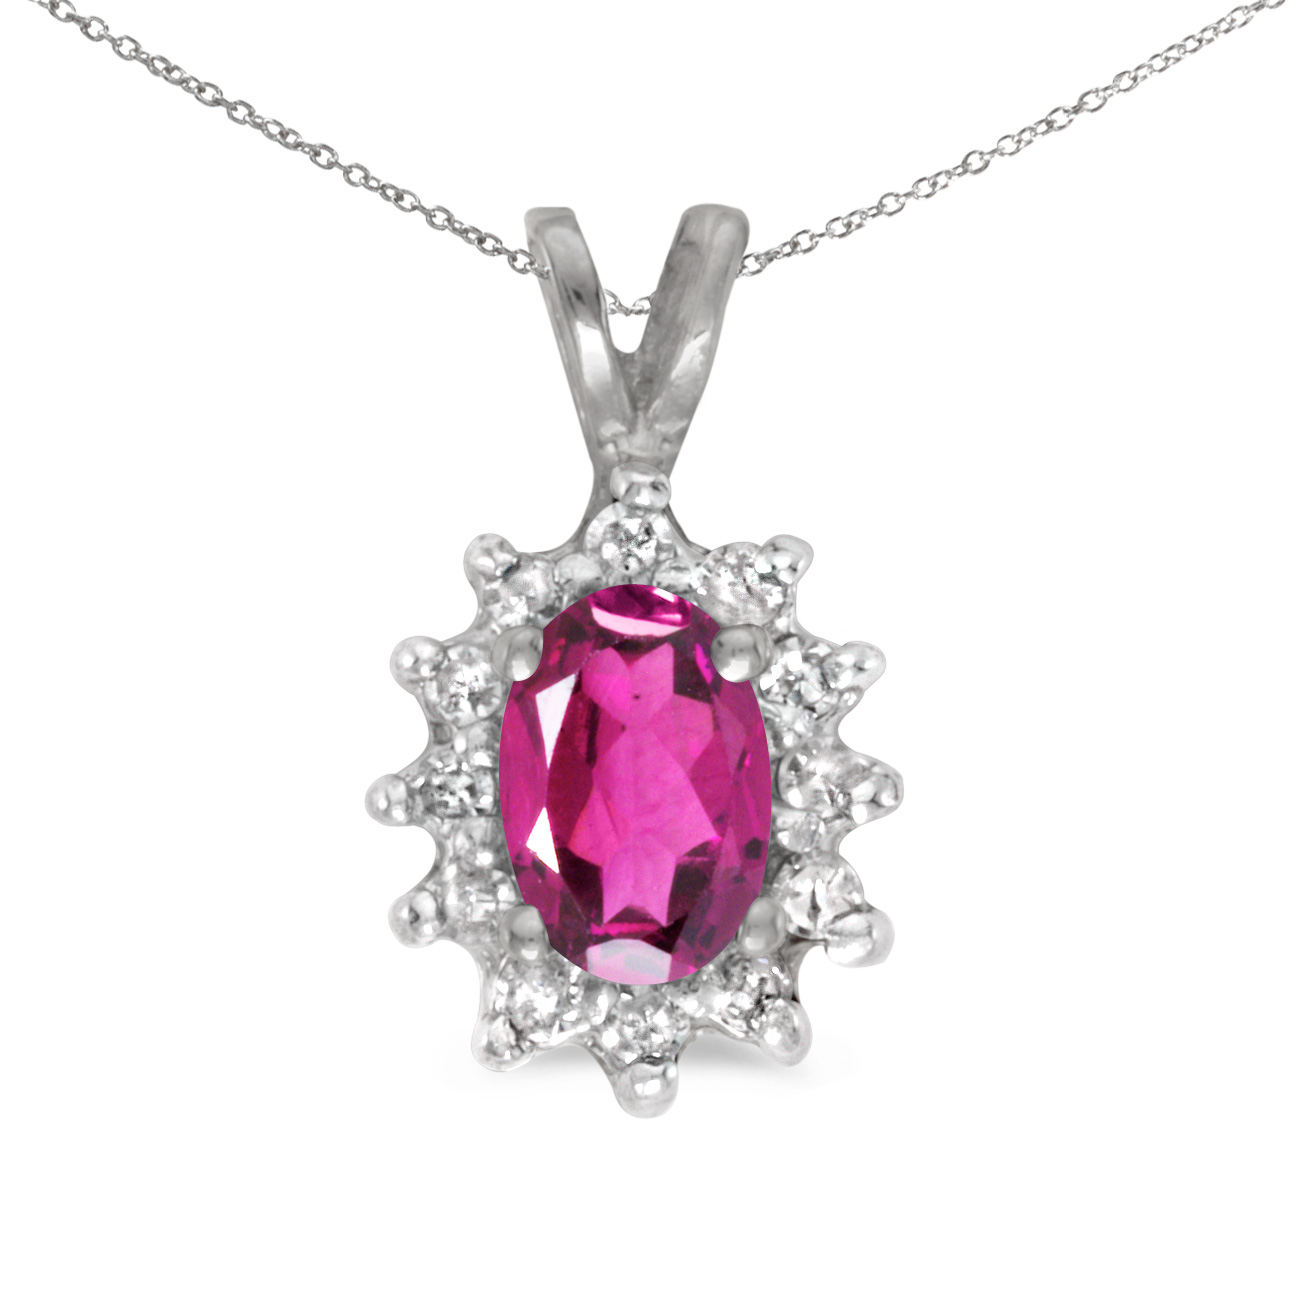 JCX2755: This 14k white gold oval pink topaz and diamond pendant features a 6x4 mm genuine natural pink topaz with a 0.43 ct total weight.